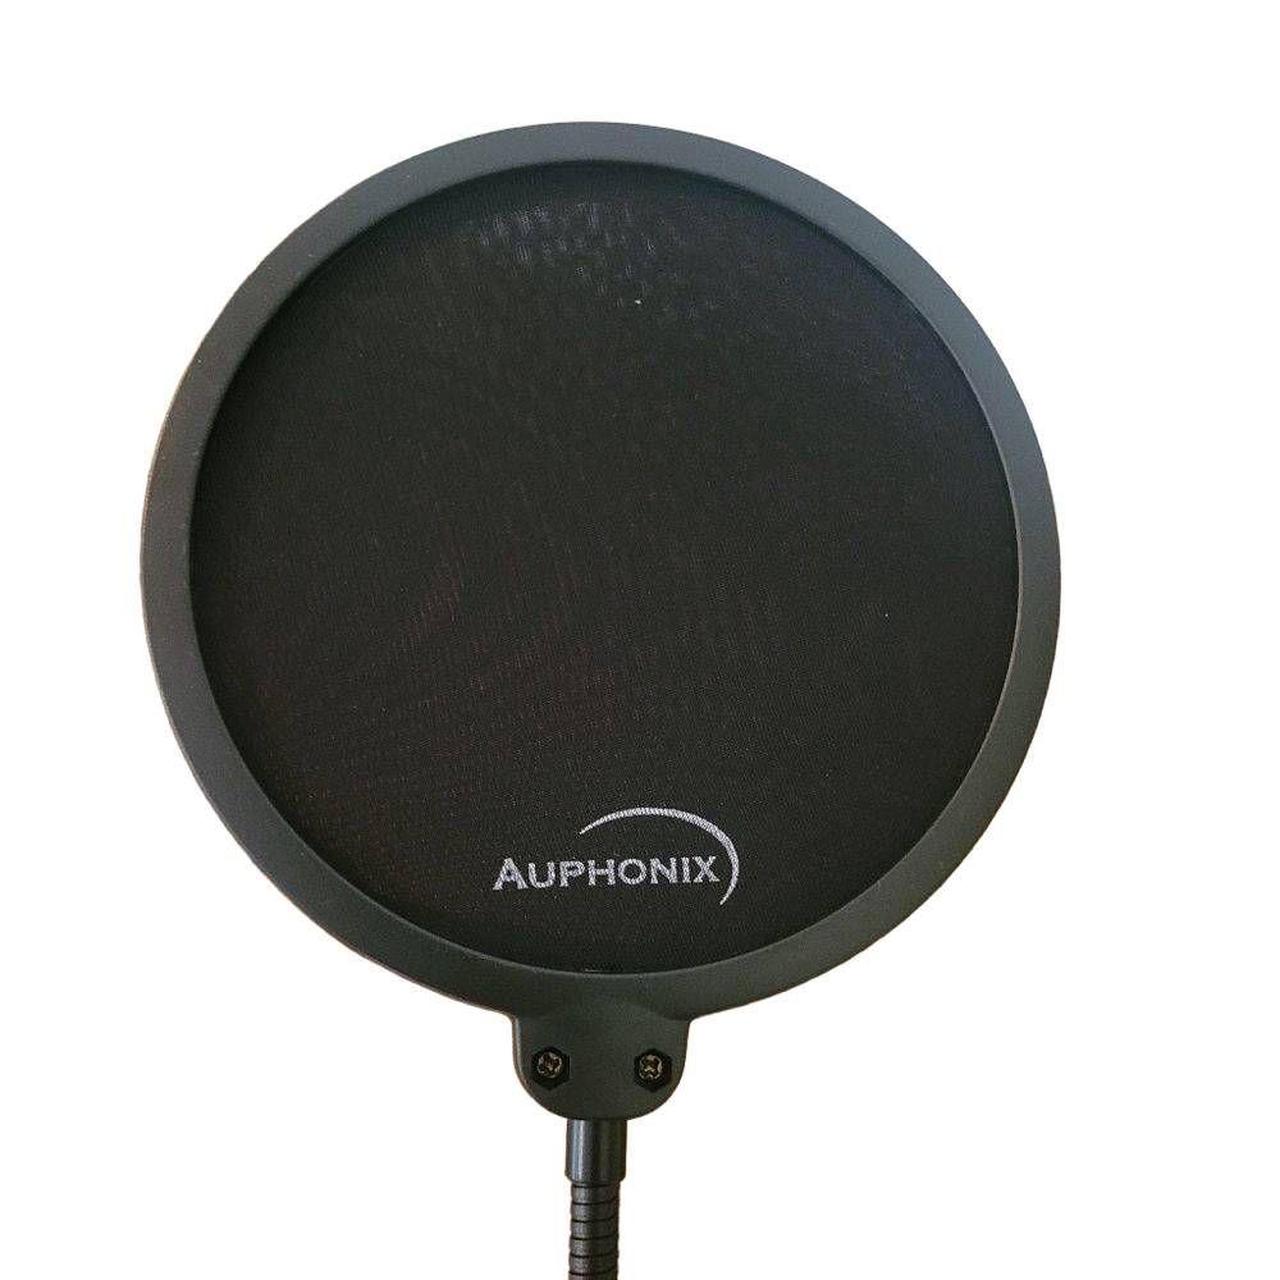 Auphonix 6-Inch Pop Filter for Blue Yeti Microphone